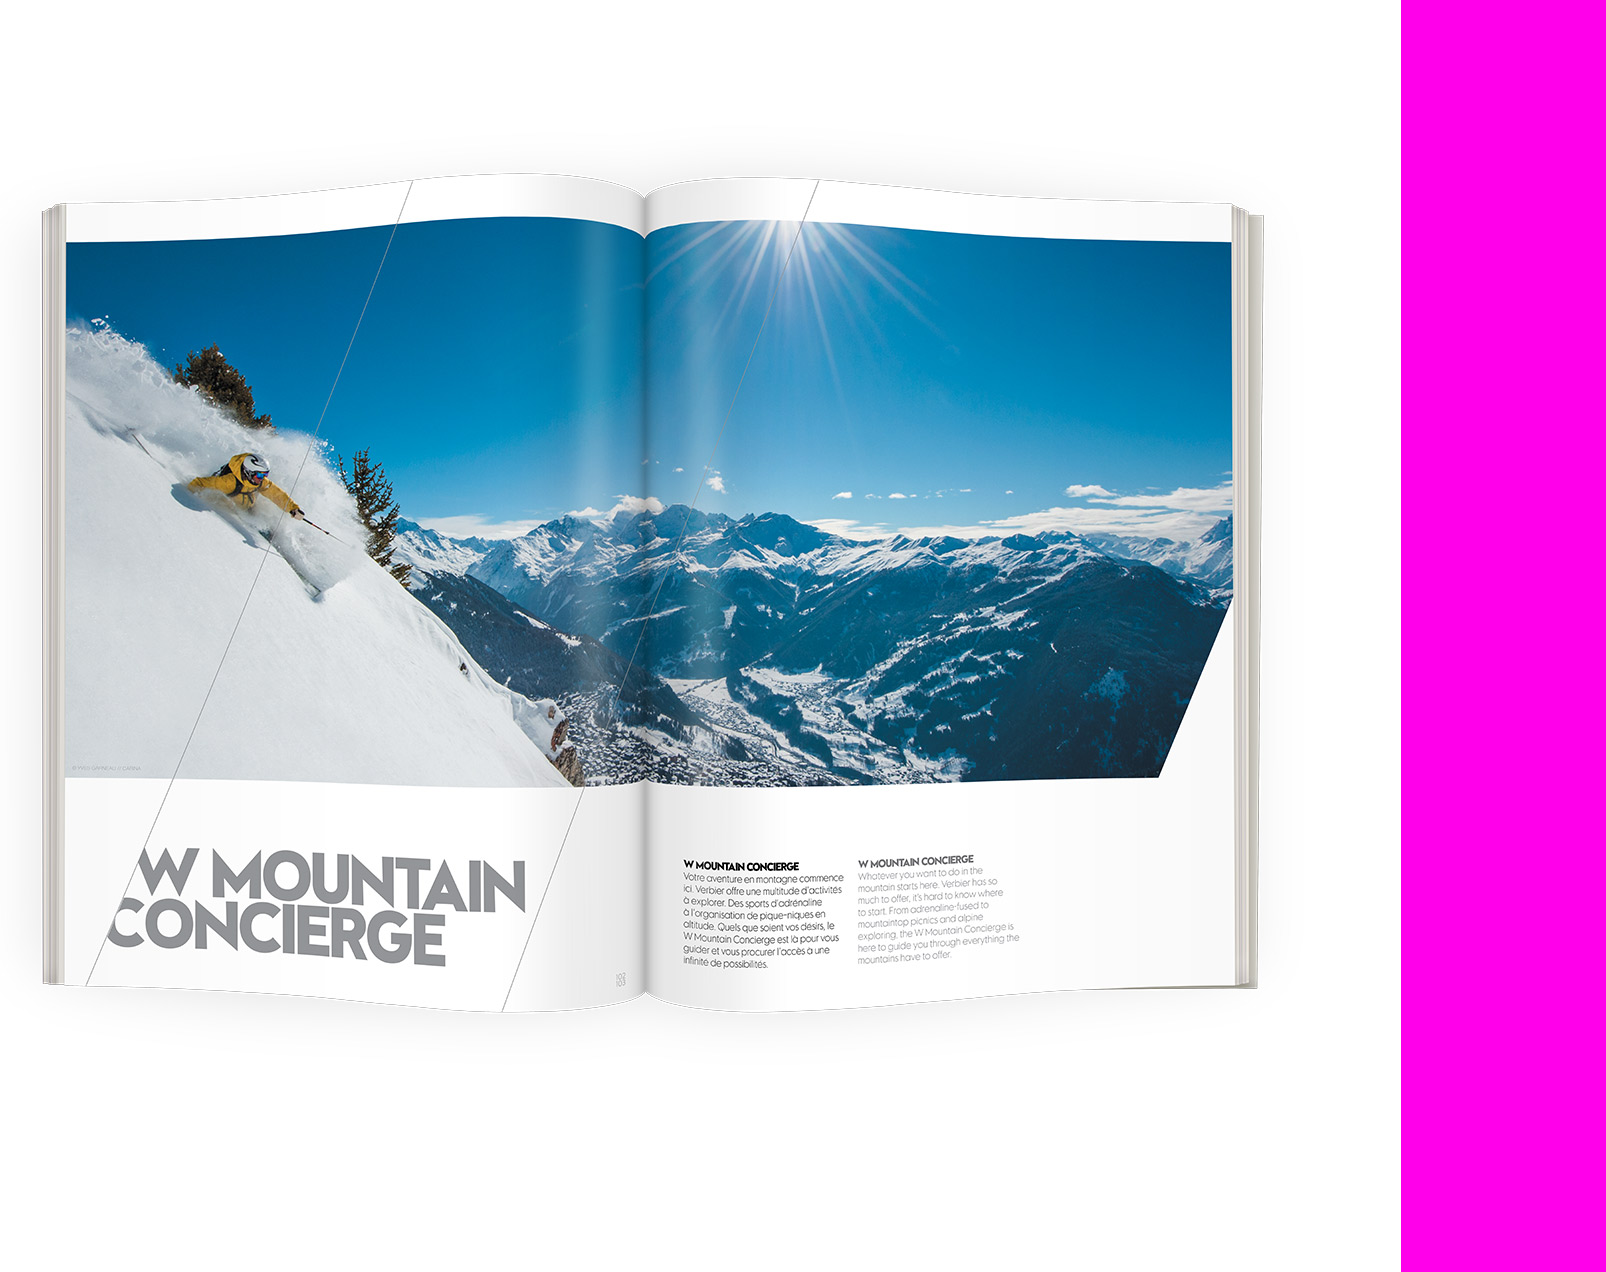 W Verbier Magazine- W Hotels - By D-facto lab